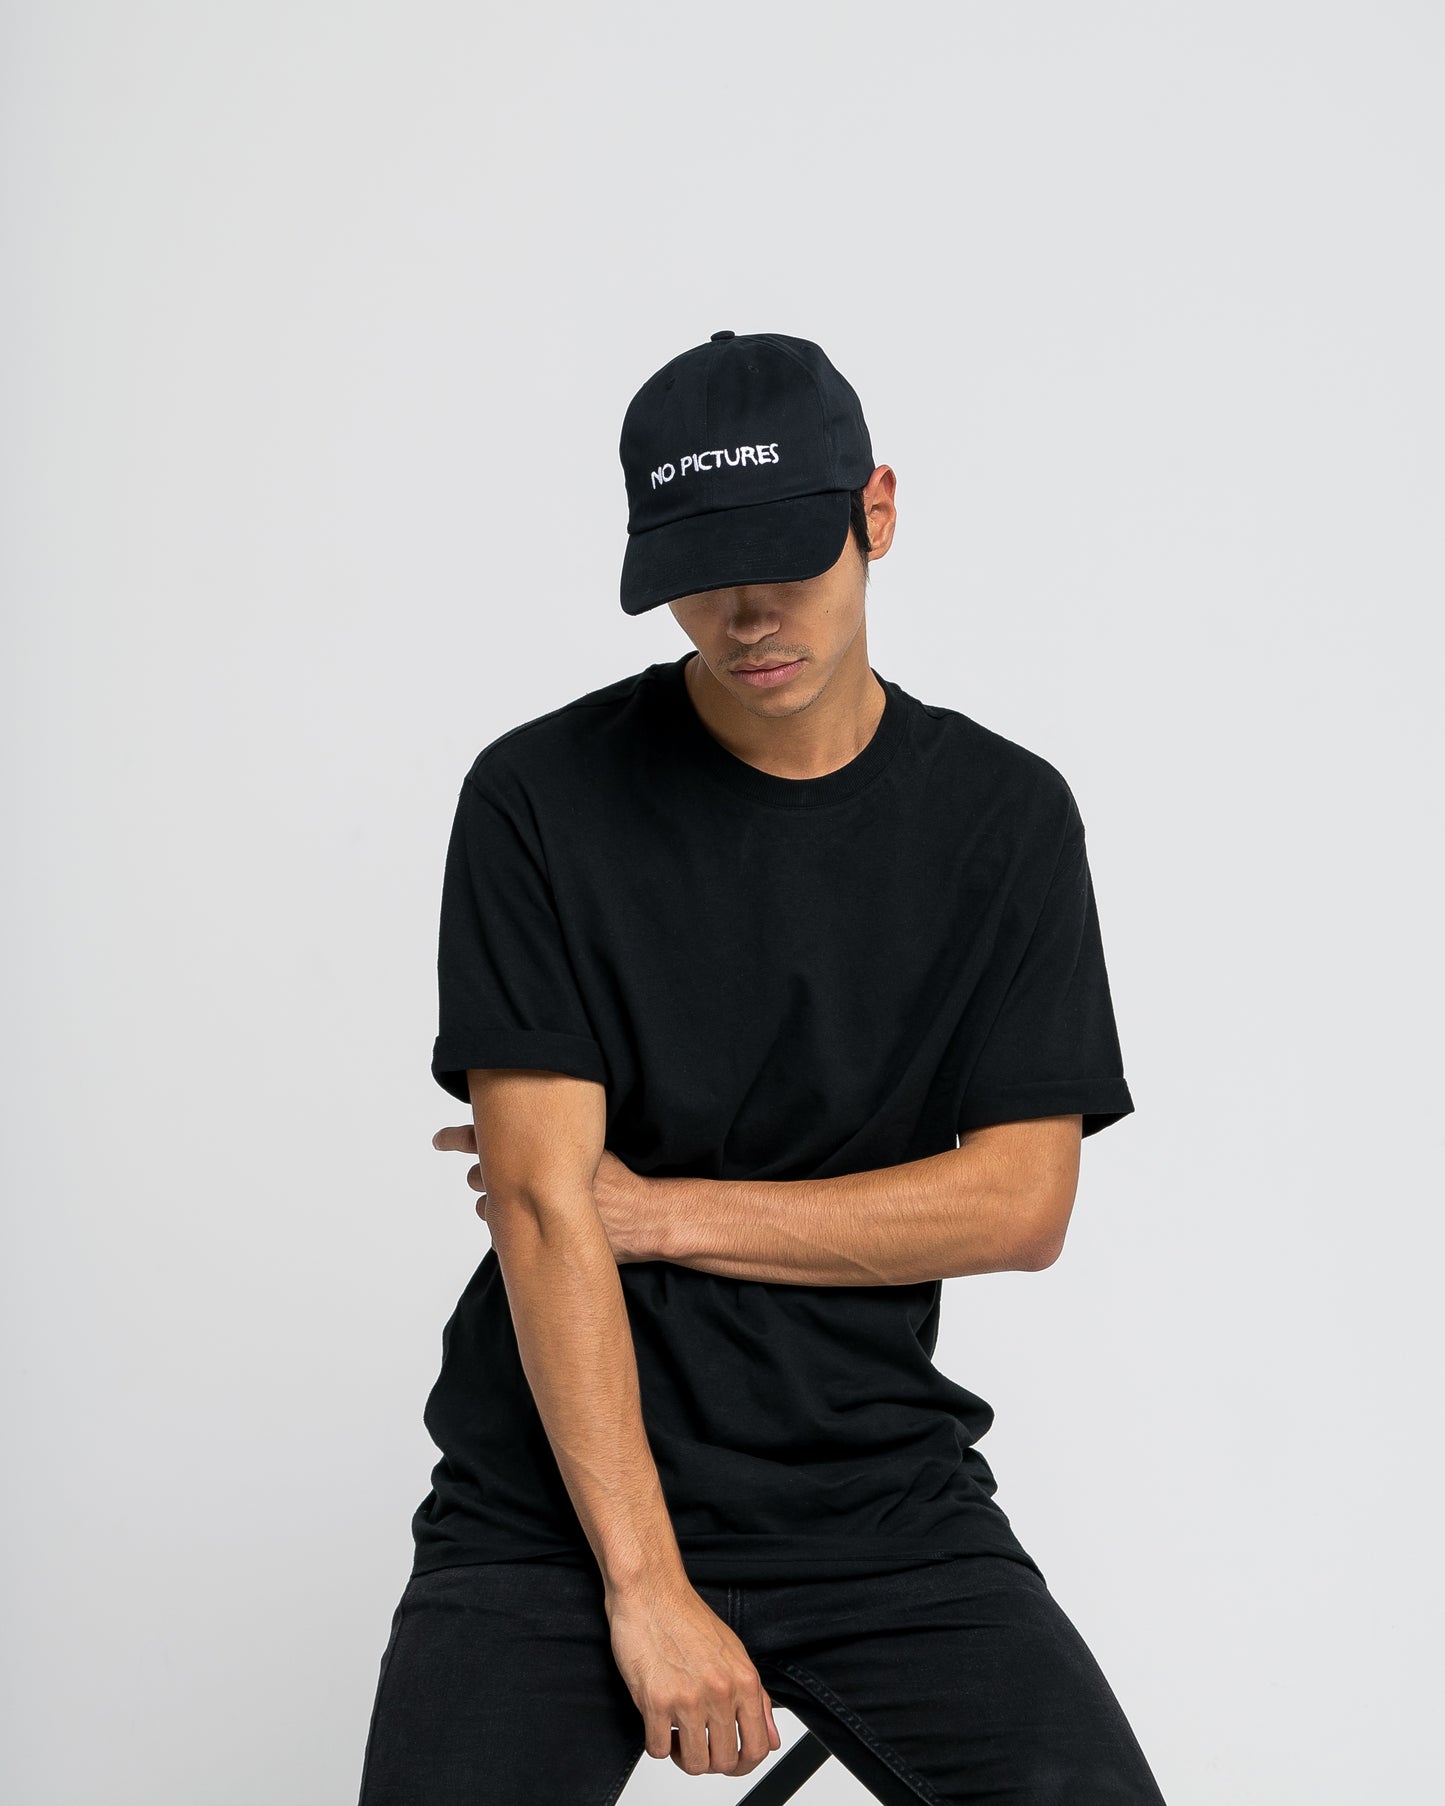 Nasaseasons No Pictures embroidered baseball hat in black